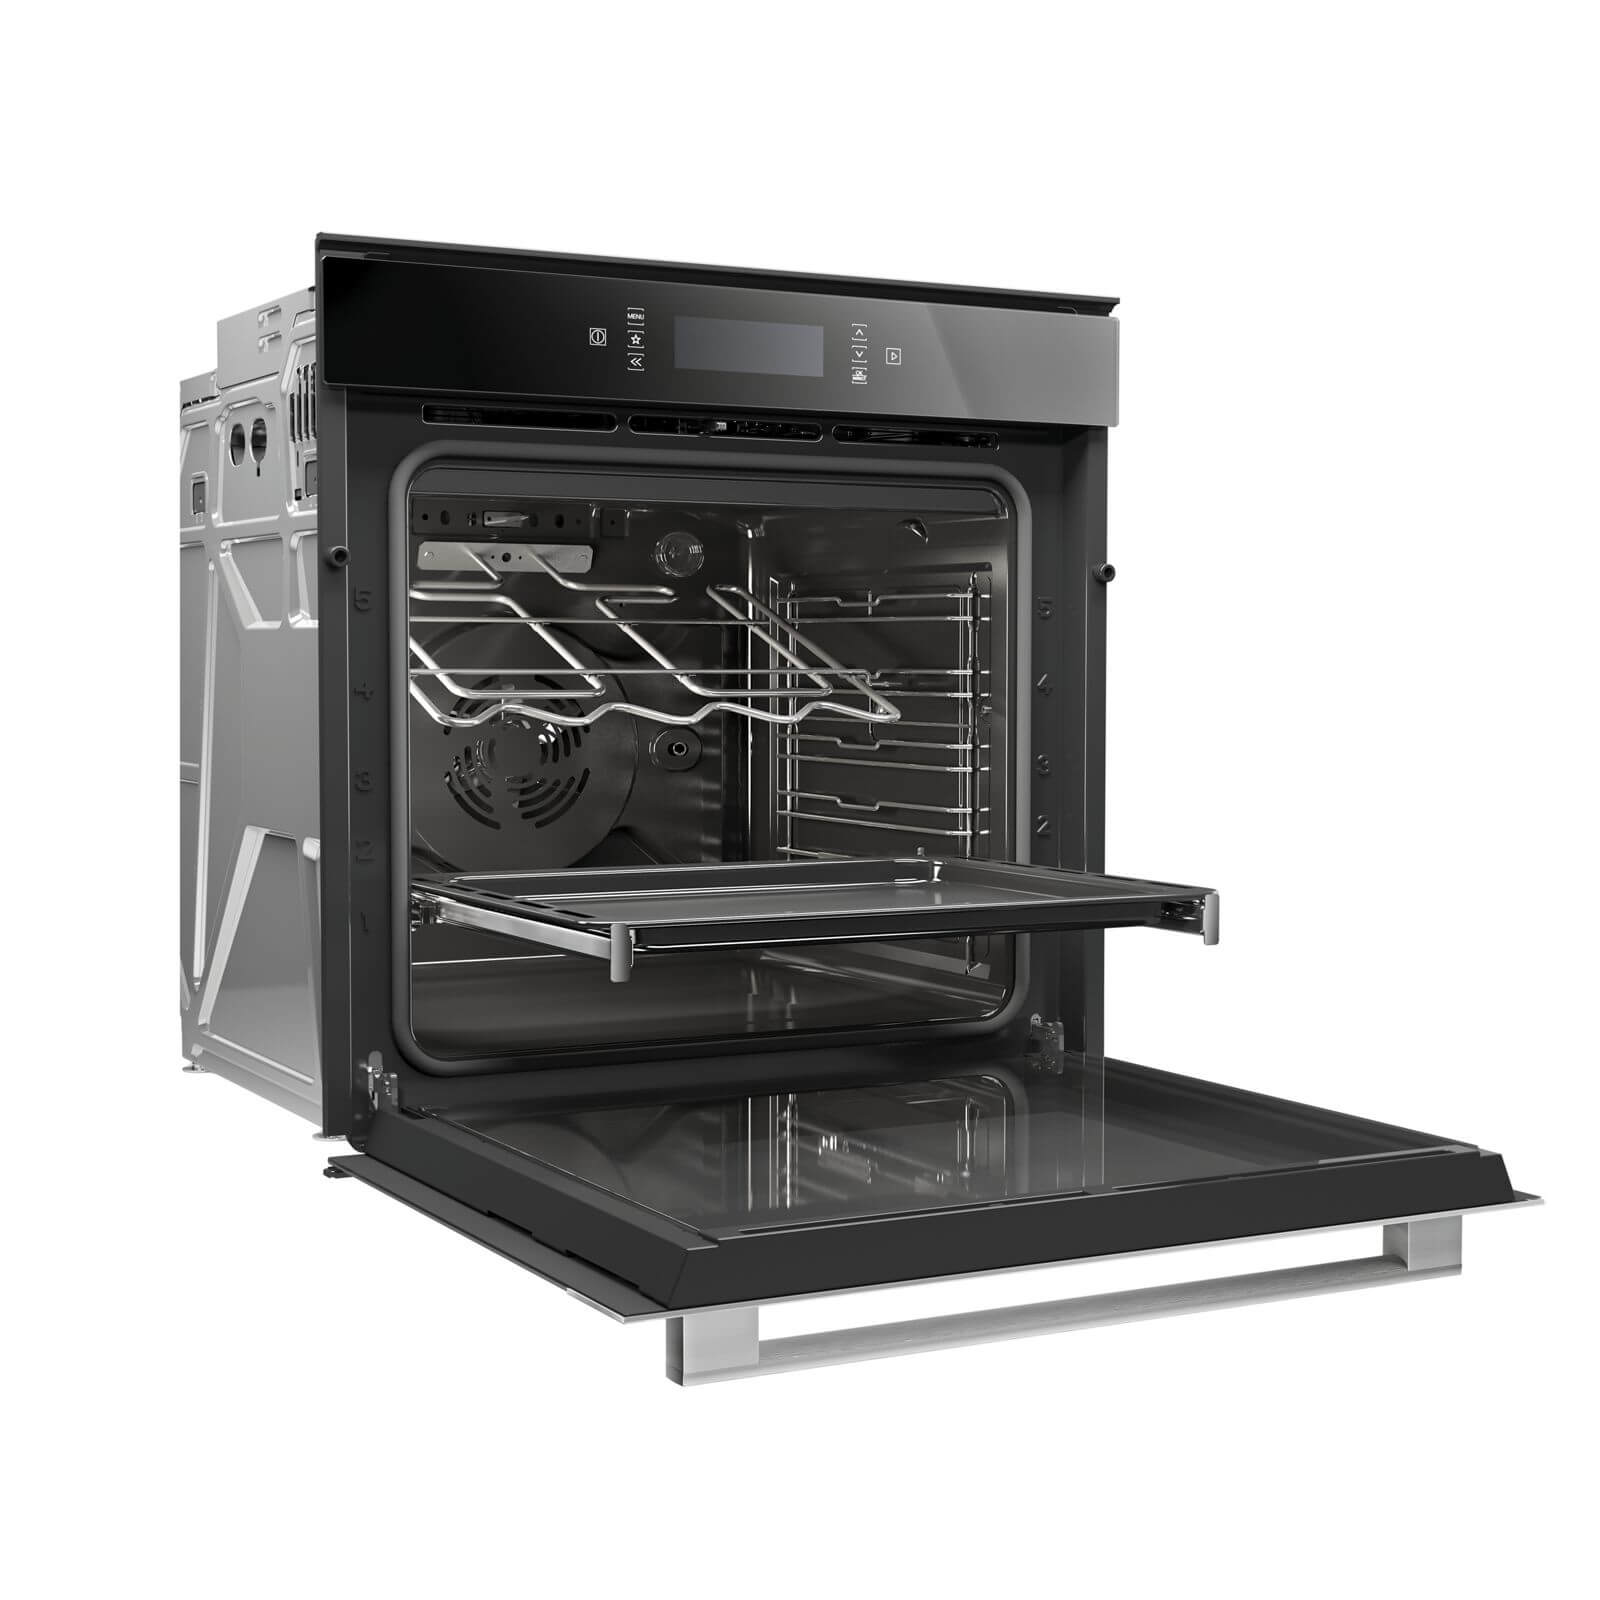 Hotpoint Class 9 SI9 891 SC IX Built-in Electric Oven - Stainless Steel